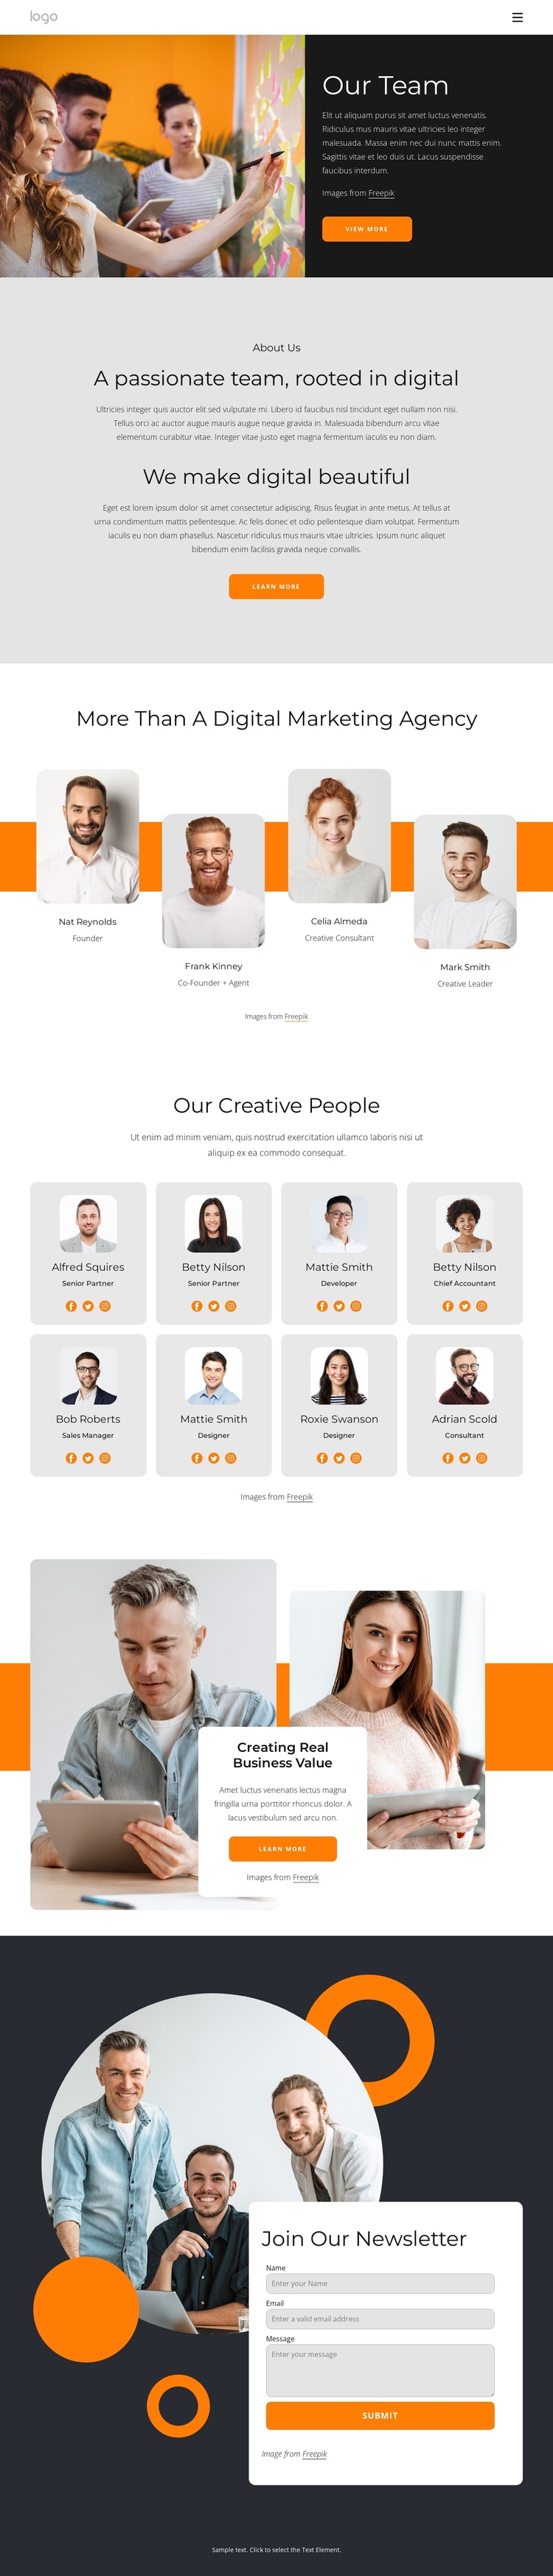 We are creative people with big dreams Website Builder Software